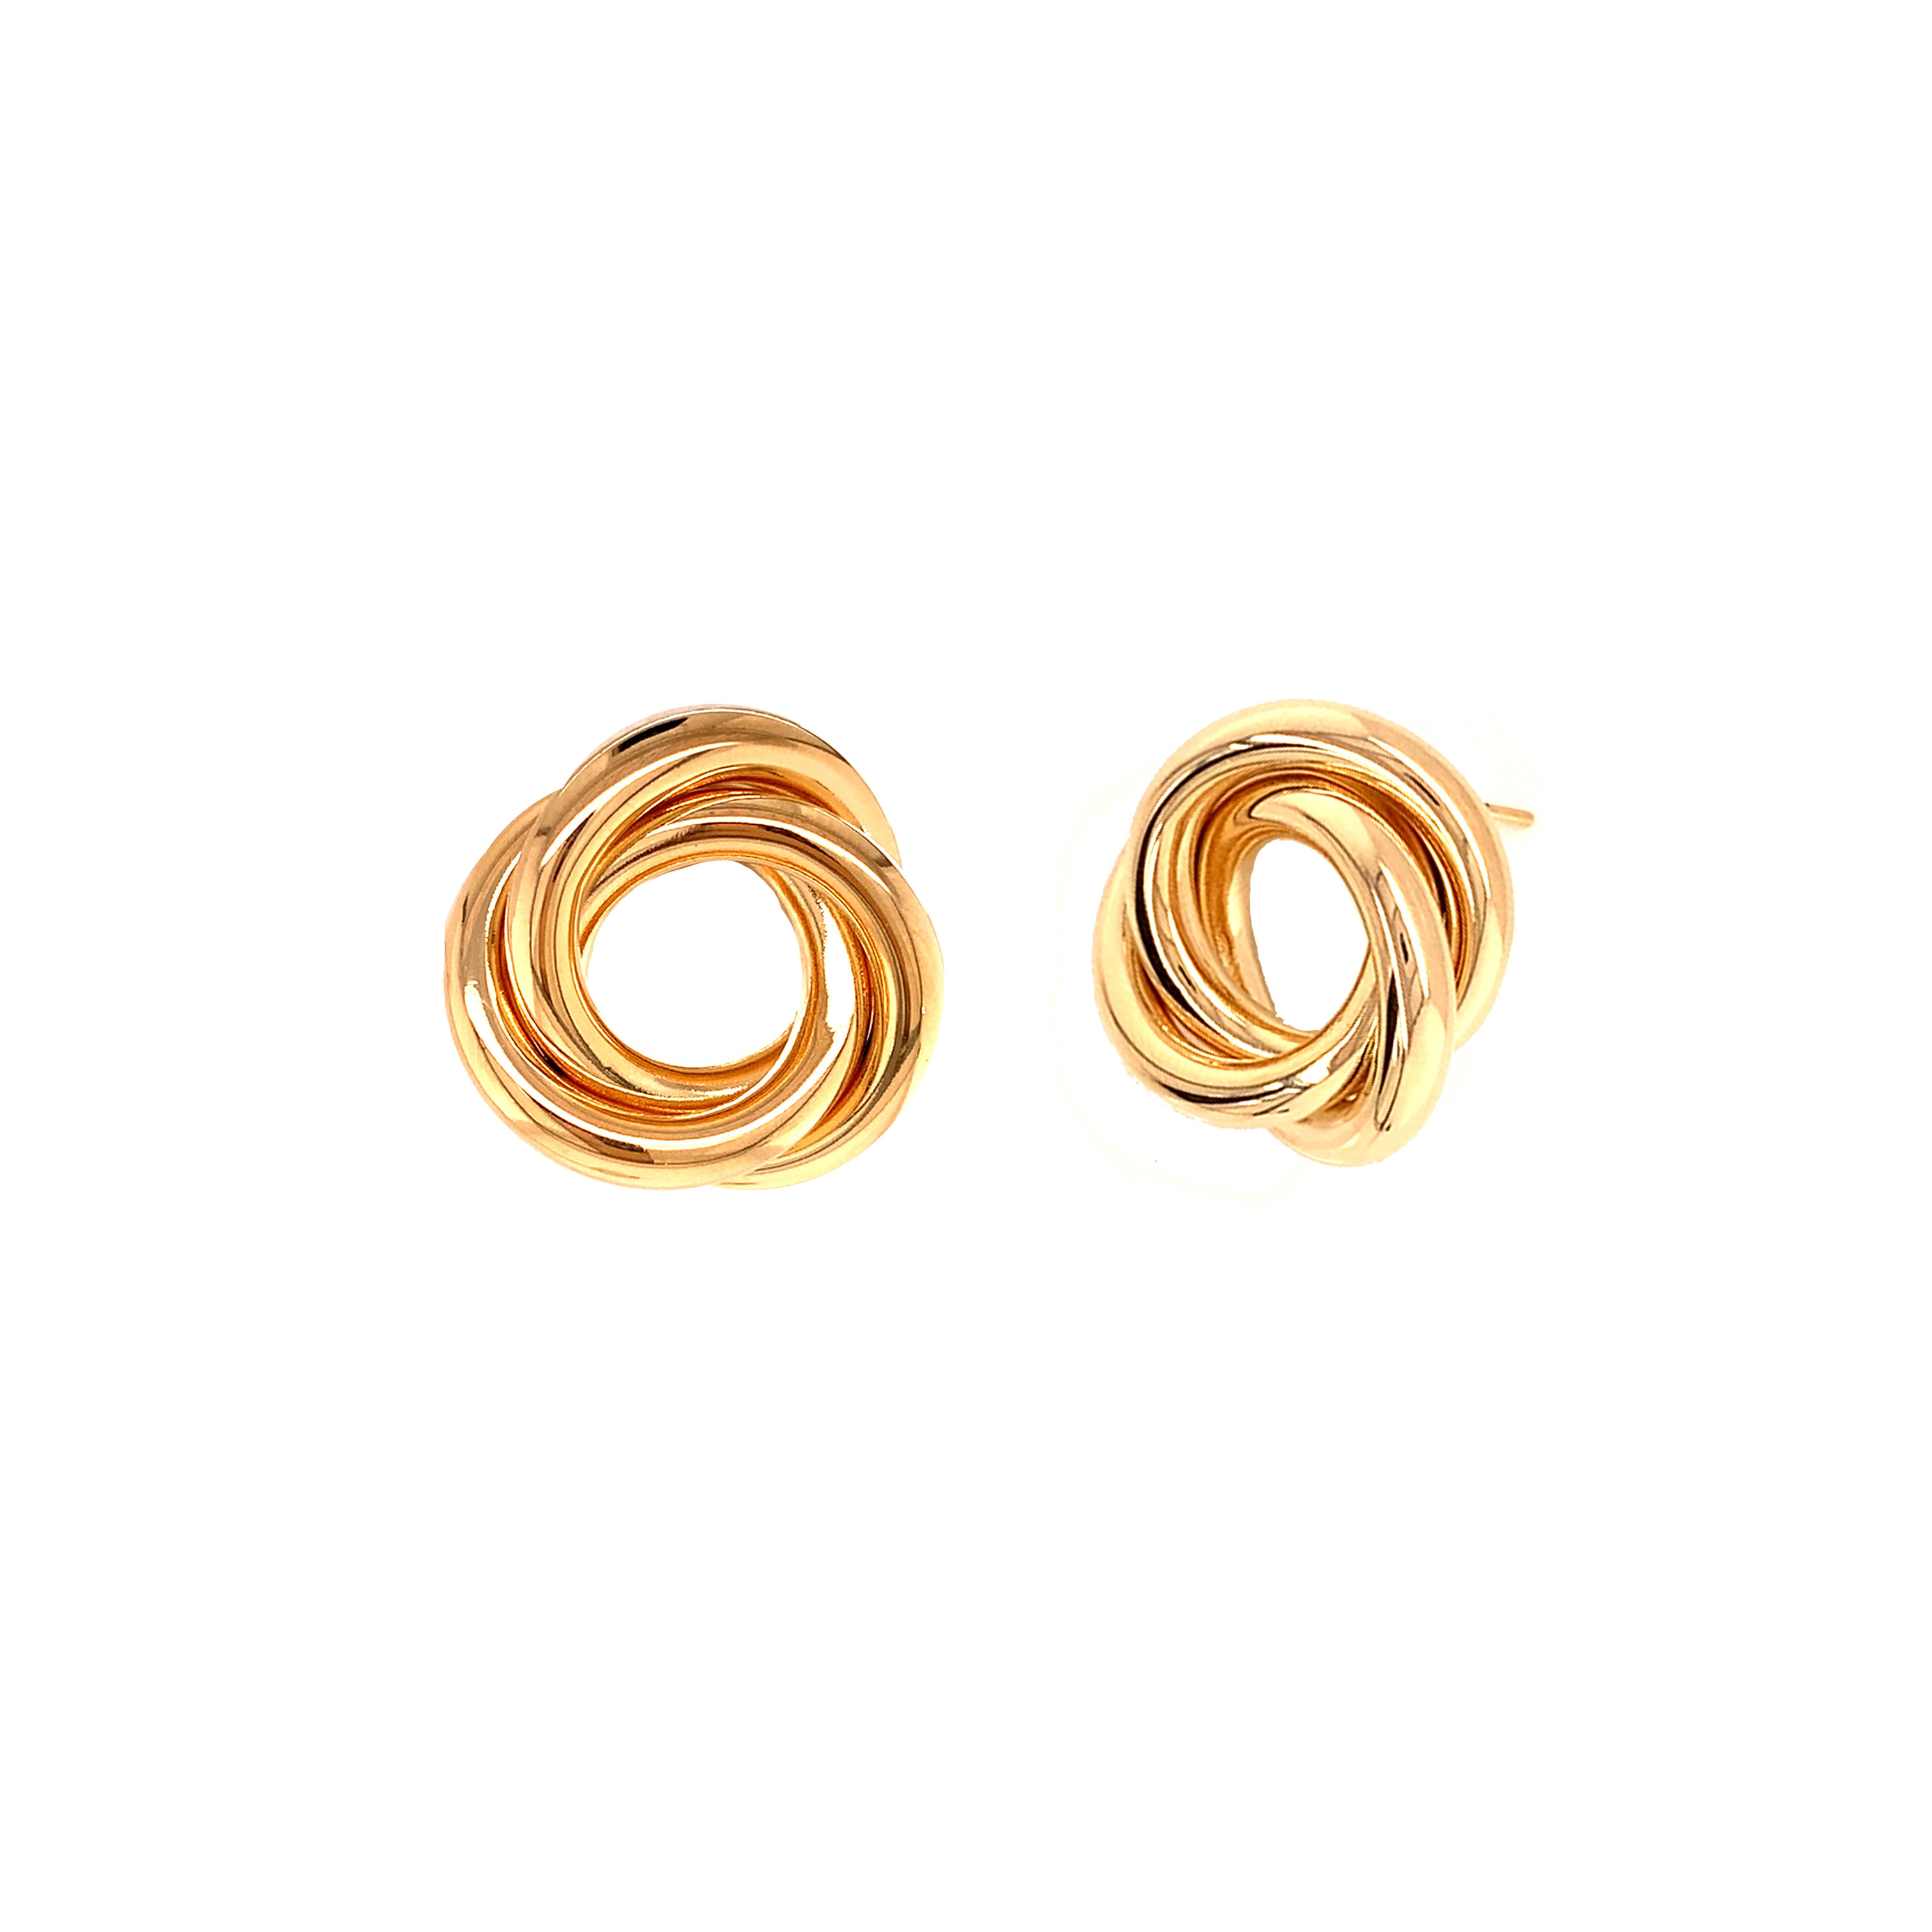 22mm x 23mm Looped Pushbacks - Gold Filled